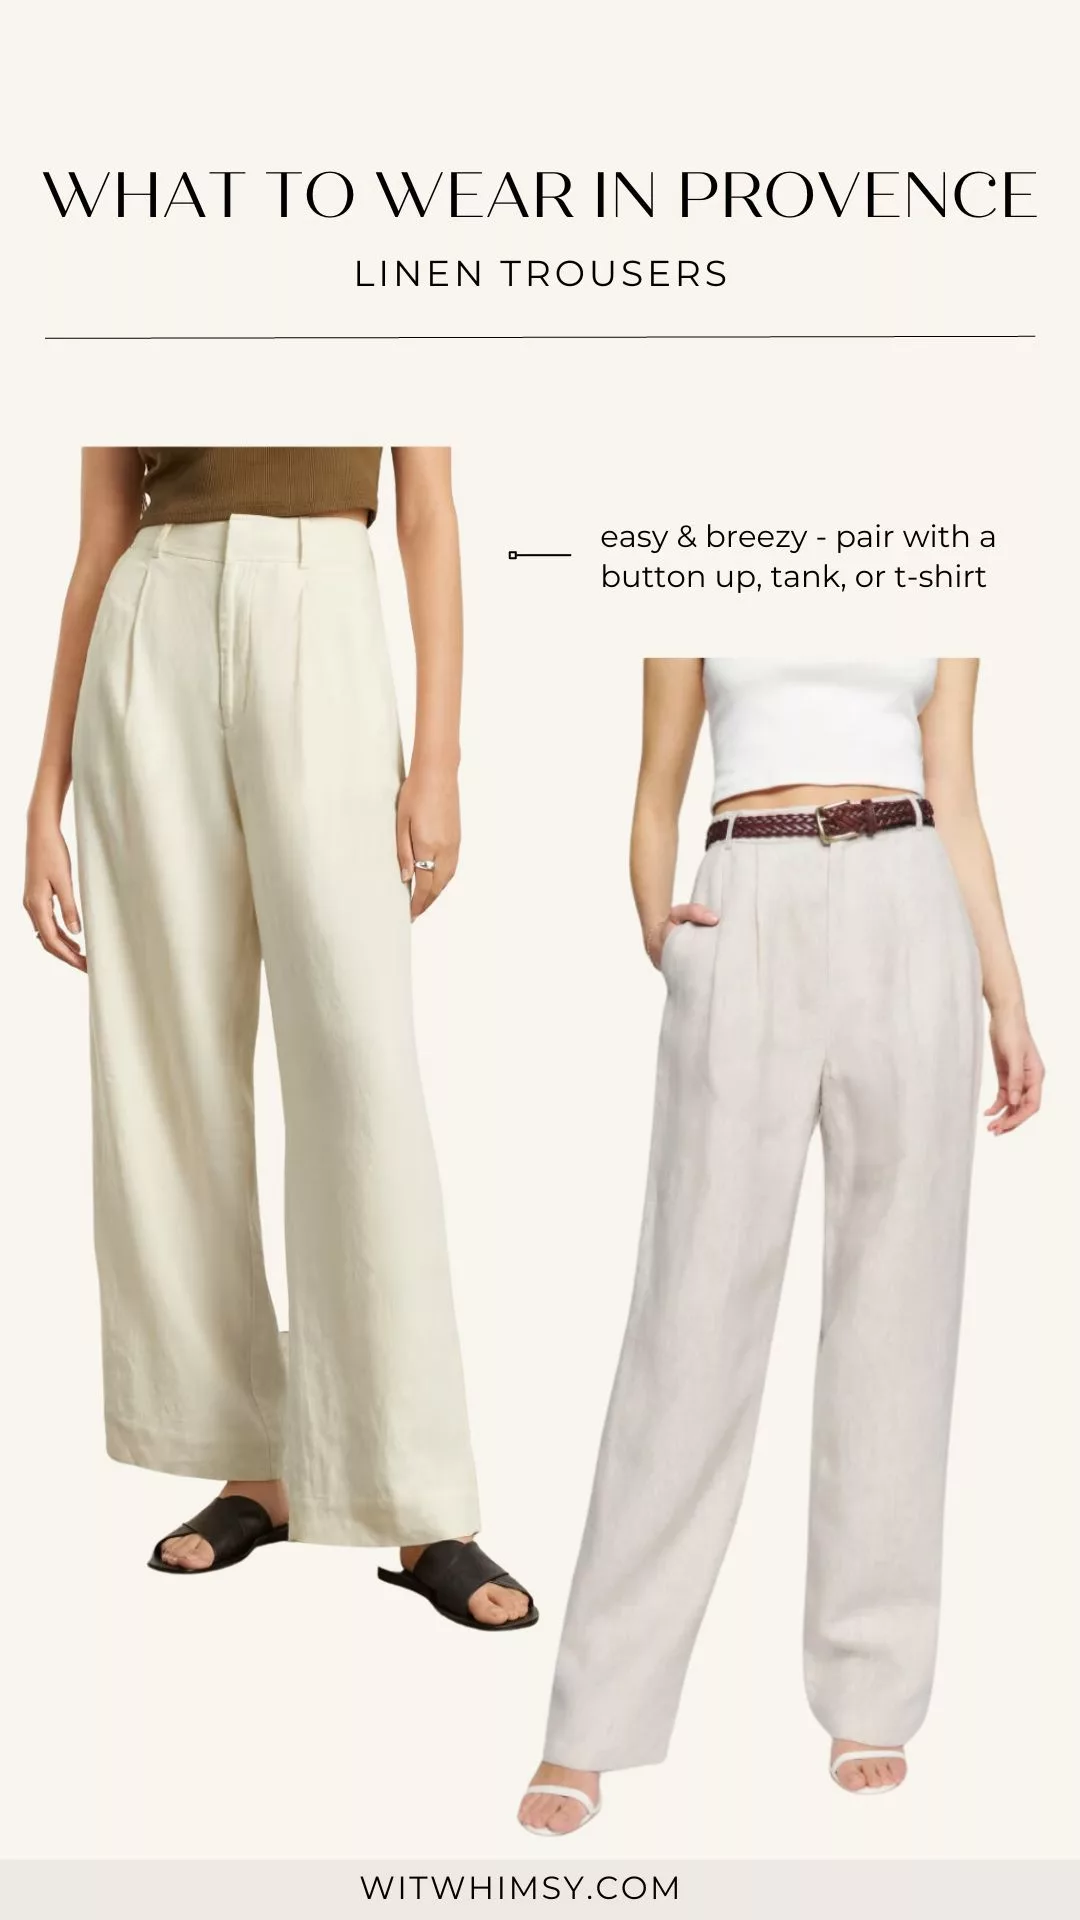 Linen Pants for Provence